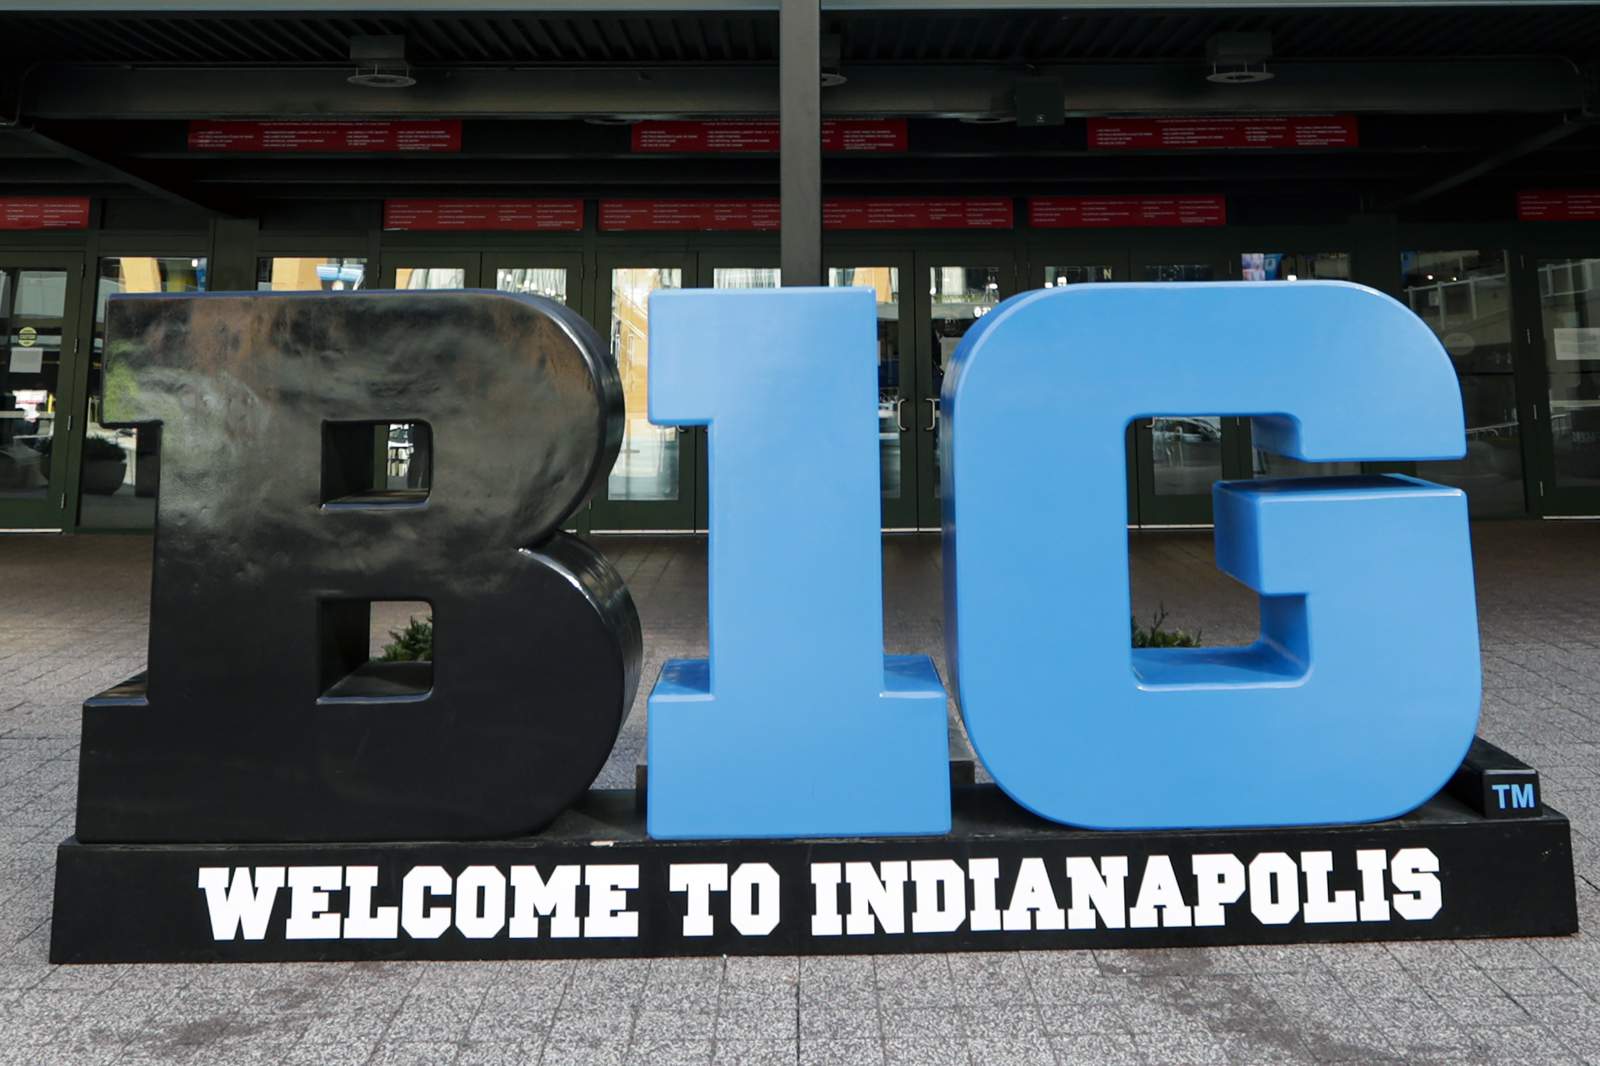 Big Ten moves men's tournament from Chicago to Indianapolis